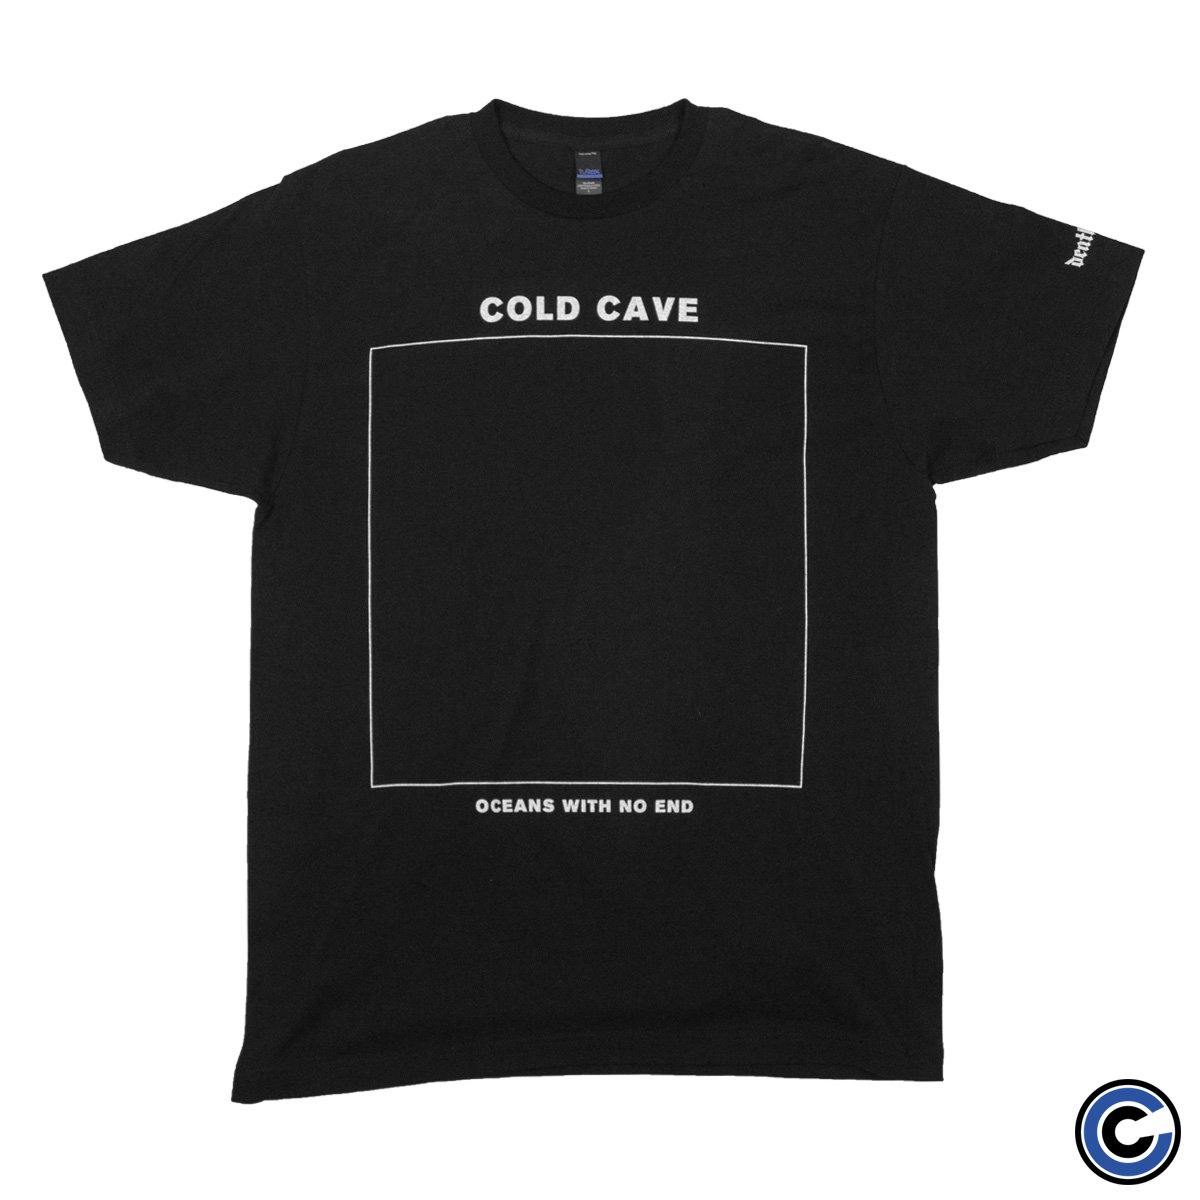 Buy – Cold Cave "Oceans With No End" Shirt – Band & Music Merch – Cold Cuts Merch